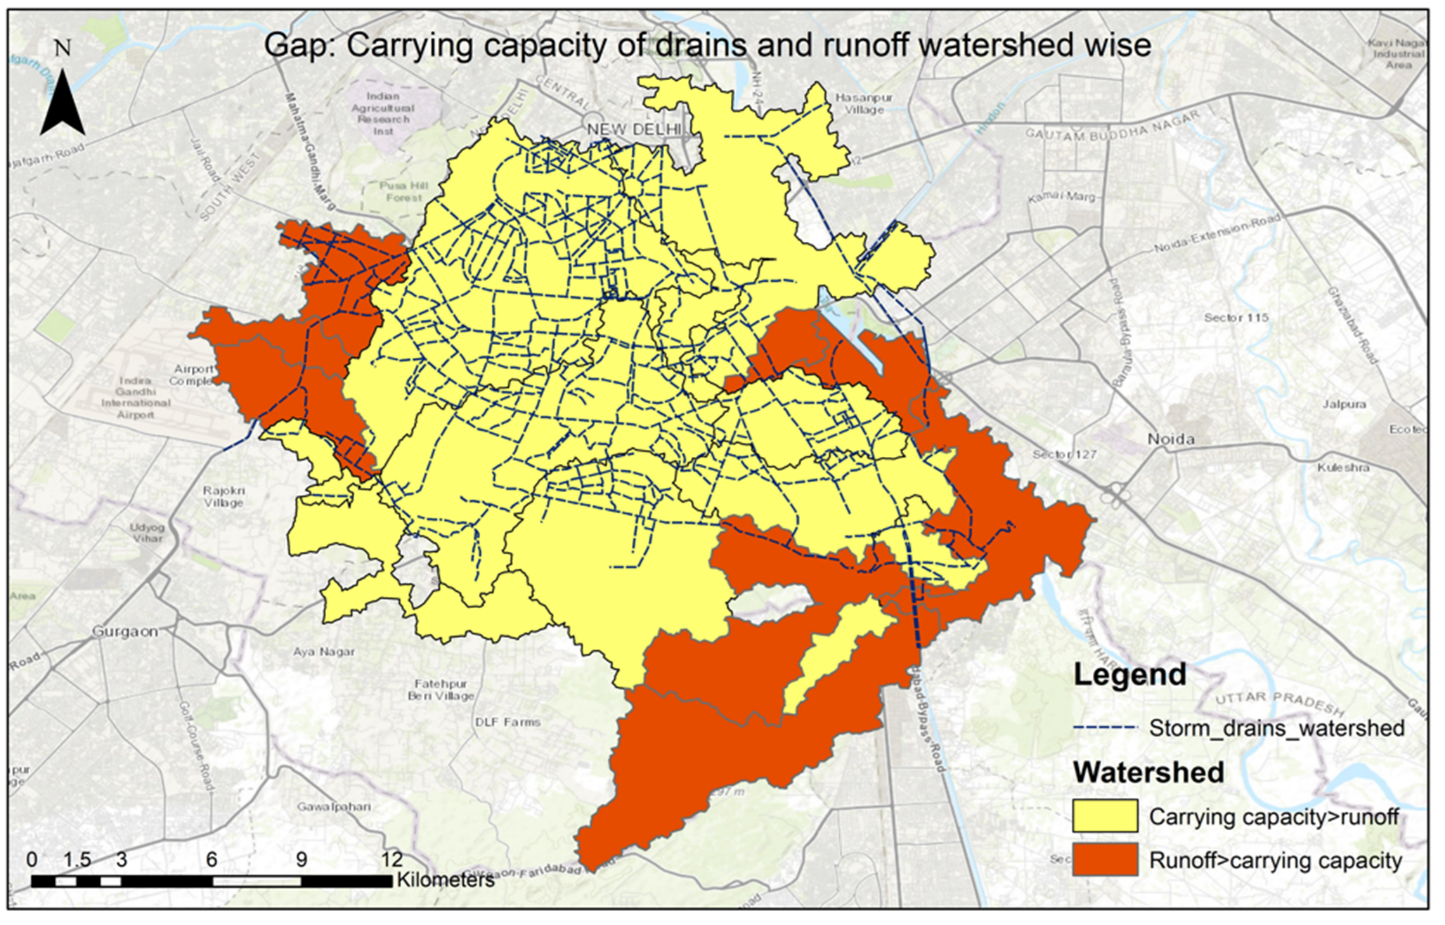 Figure 7. Map showing Watershed Carrying Capacity of drains VS Runoff